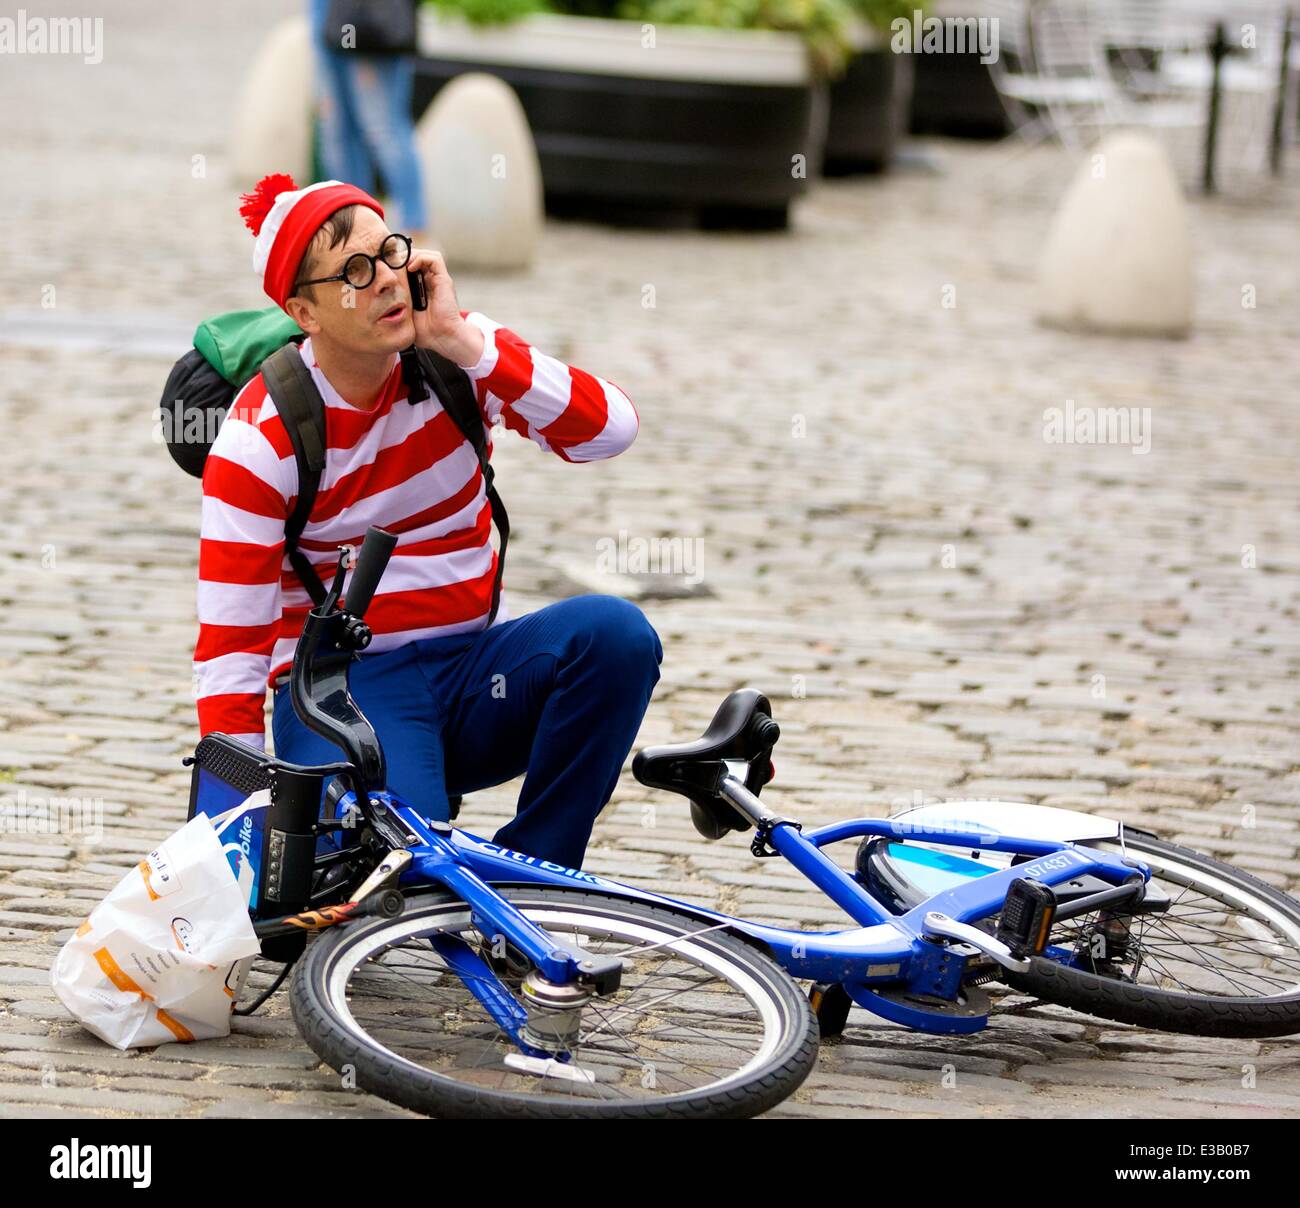 A man dressed as the character Waldo from the children's book series, 'Where's Waldo?' is spotted riding a Citi Bike in the Meatpacking District. With his hands full, Waldo eventually falls off his bicycle to the ground  Featuring: Waldo,Wally Where: New York City, NY, United States When: 14 Sep 2013 Stock Photo